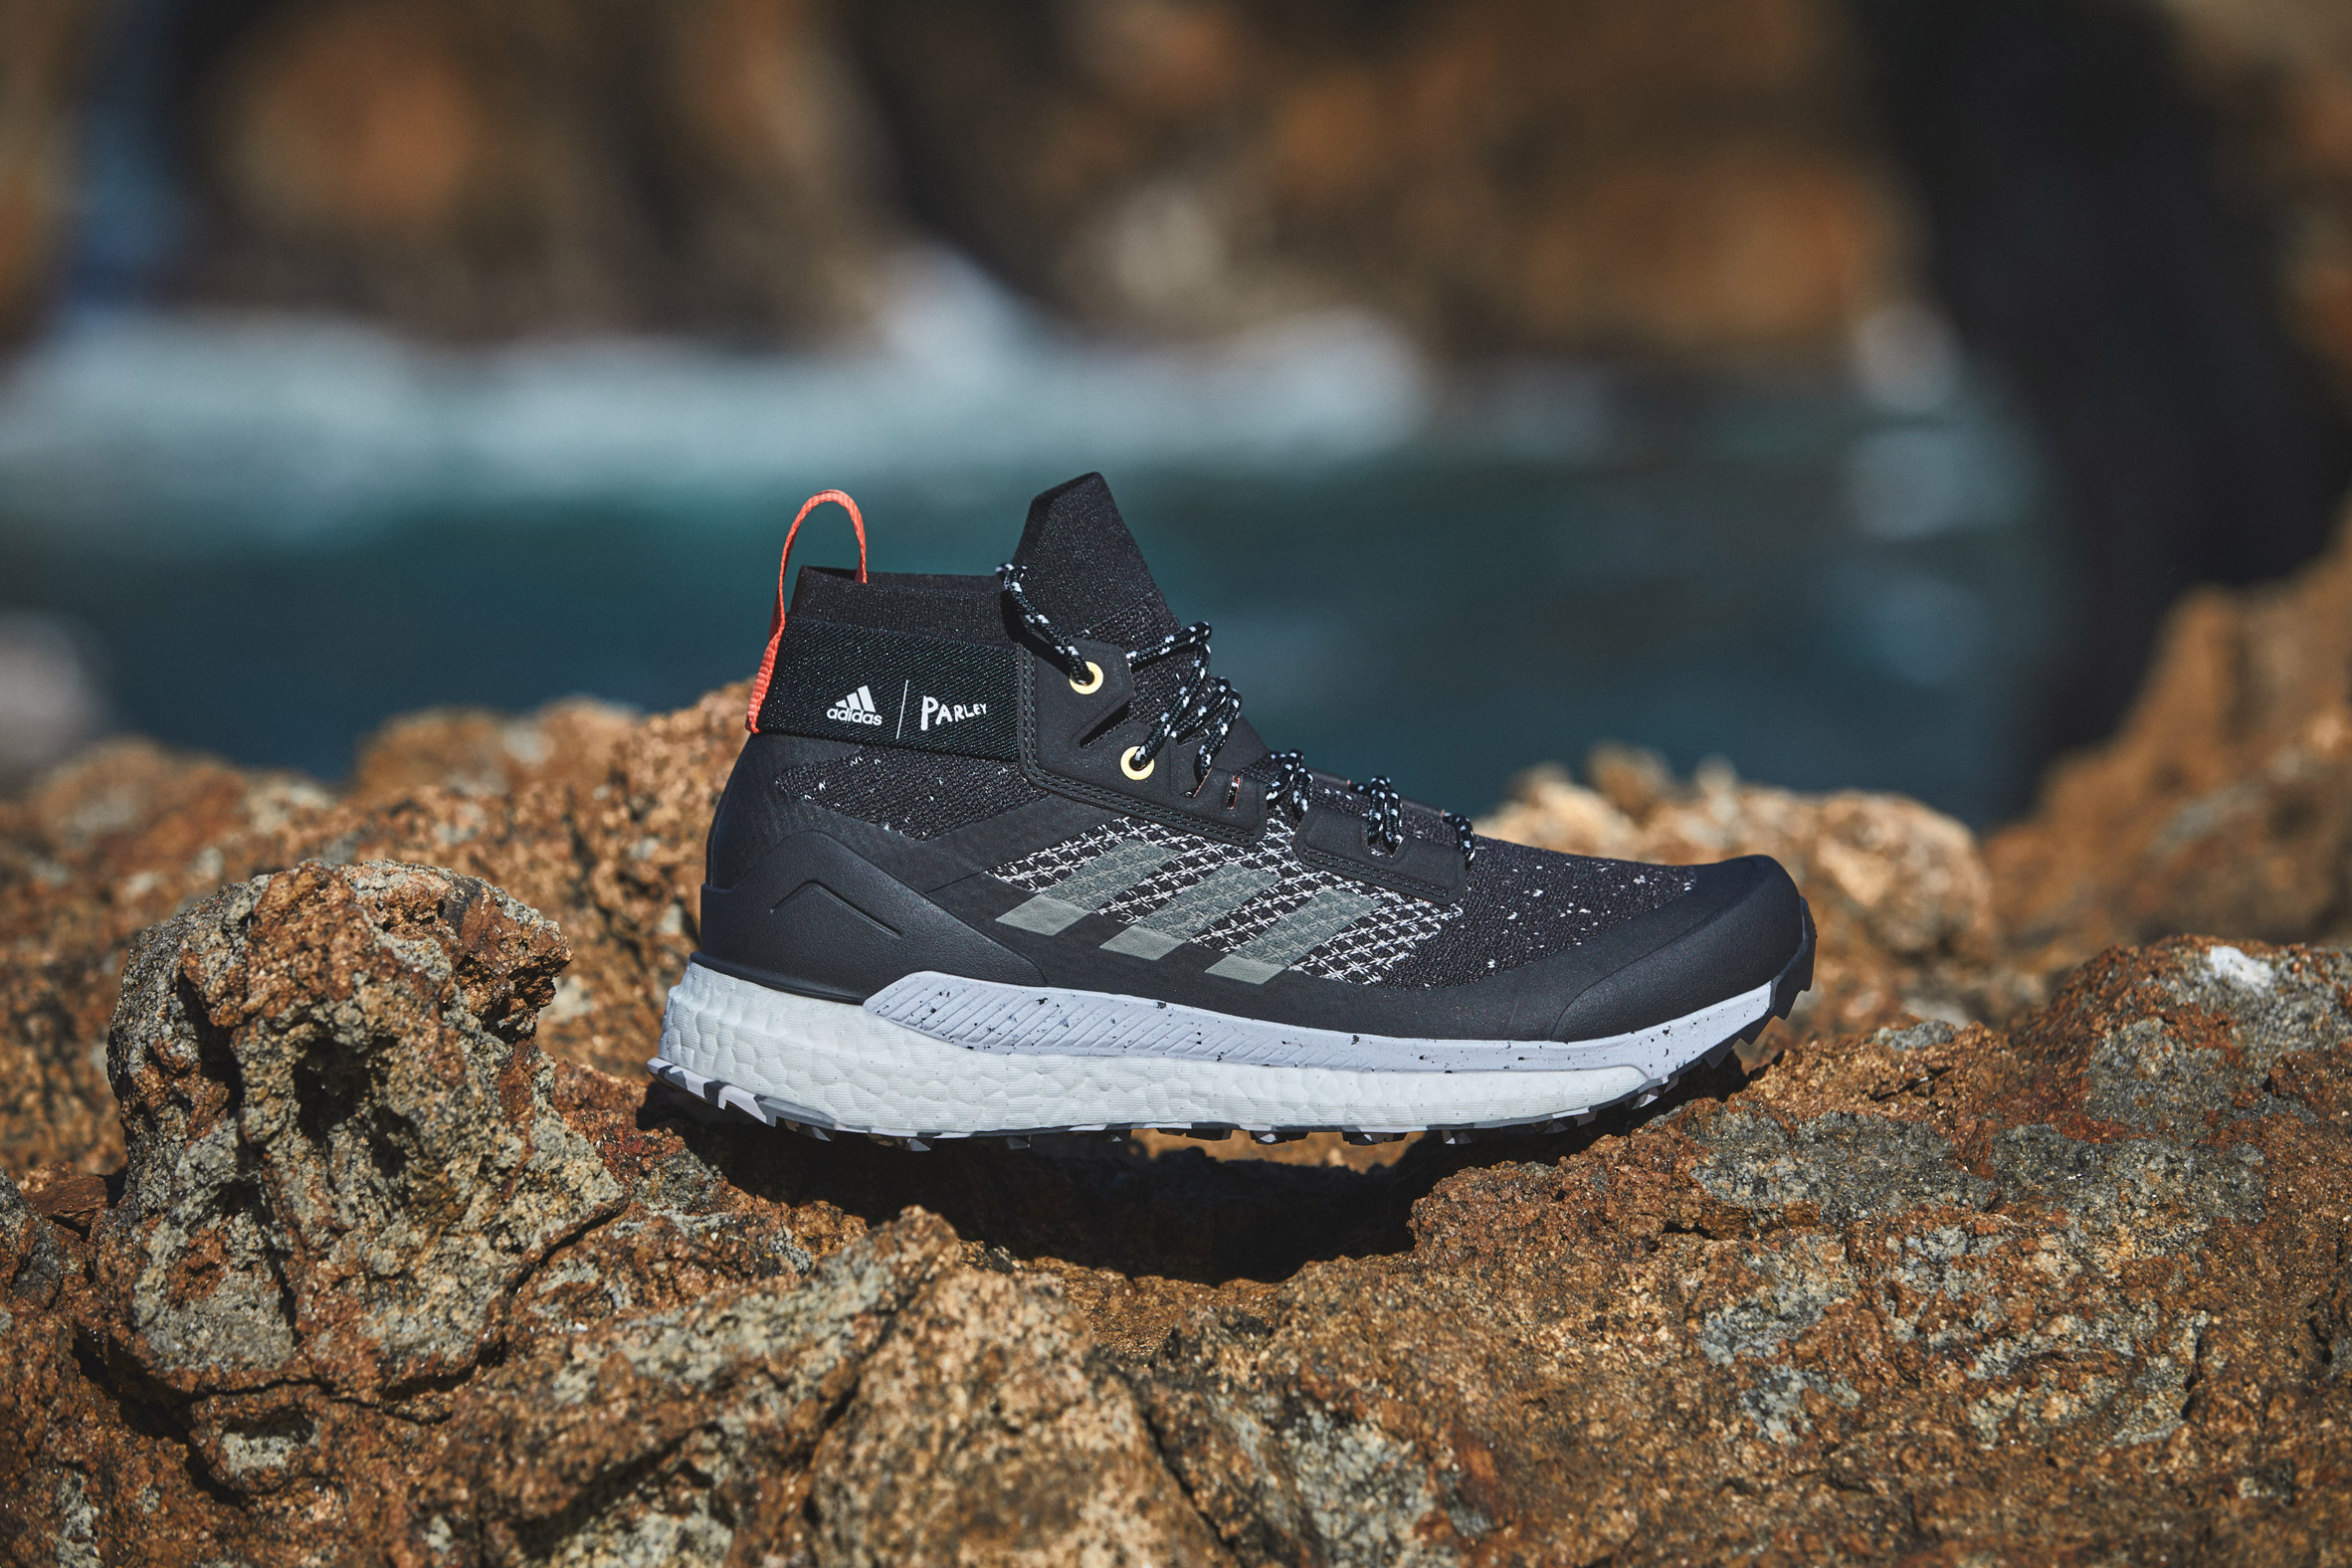 Adidas uses Parley ocean plastic for updated upper on its Terrex Free Hiker shoe